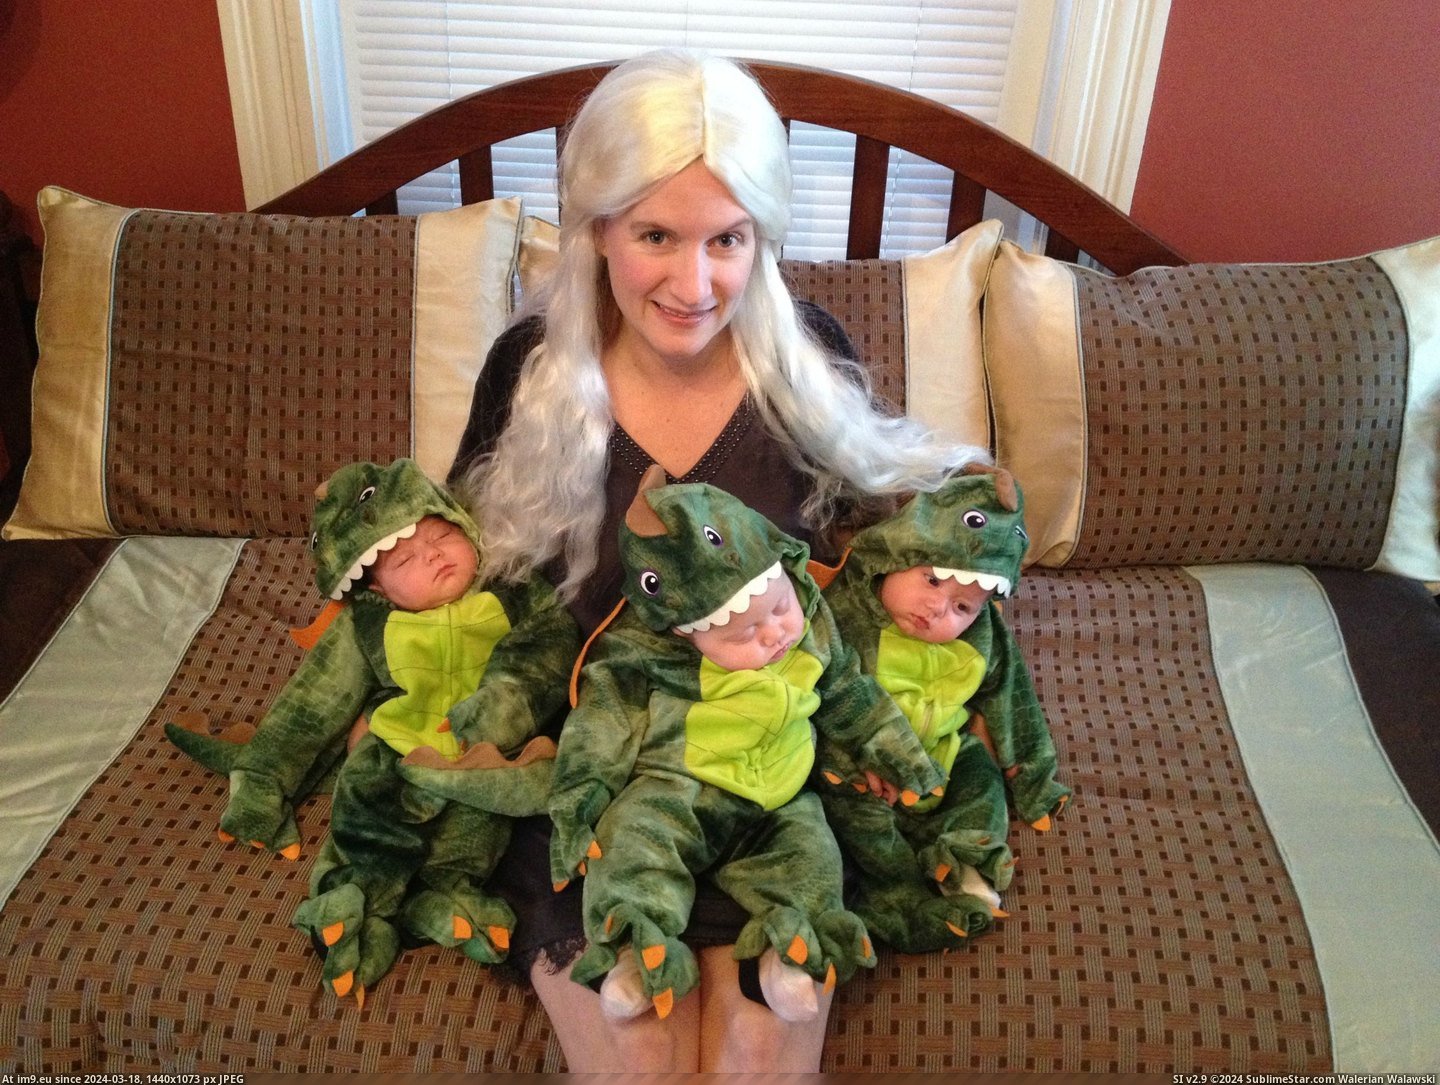 #For #Year #Sister #Dragons #Triplets #Had #Halloween #Queen [Pics] My sister had triplets this year...went with Queen of Dragons for Halloween Pic. (Bild von album My r/PICS favs))